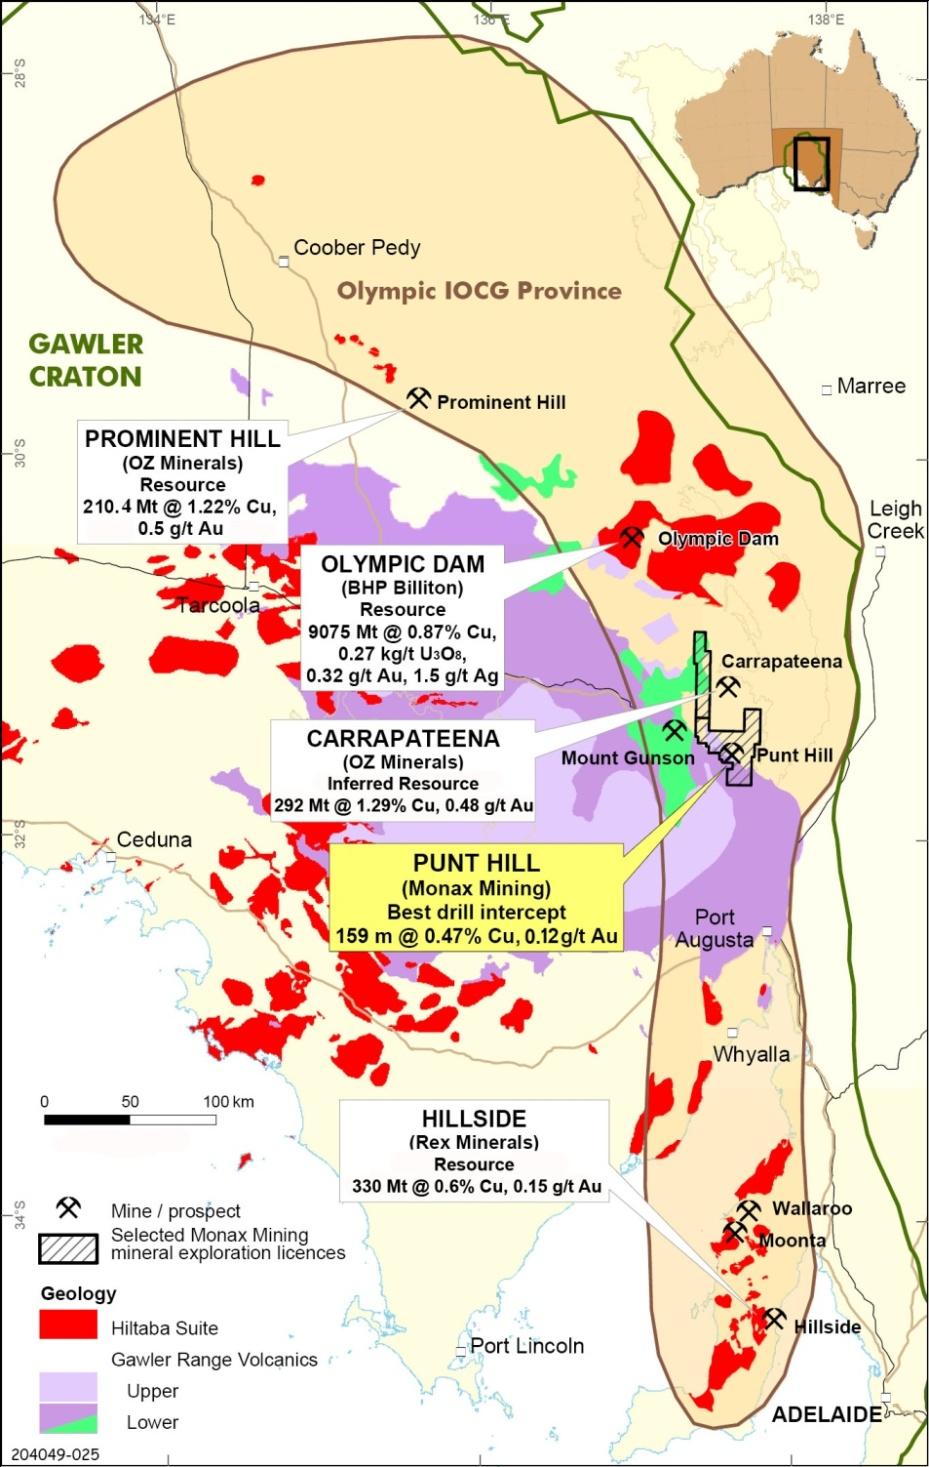 Punt Hill Copper Gold Project Monax s Flagship Project Punt Hill Located within Olympic Iron-Oxide Copper-Gold Province in South Australia.